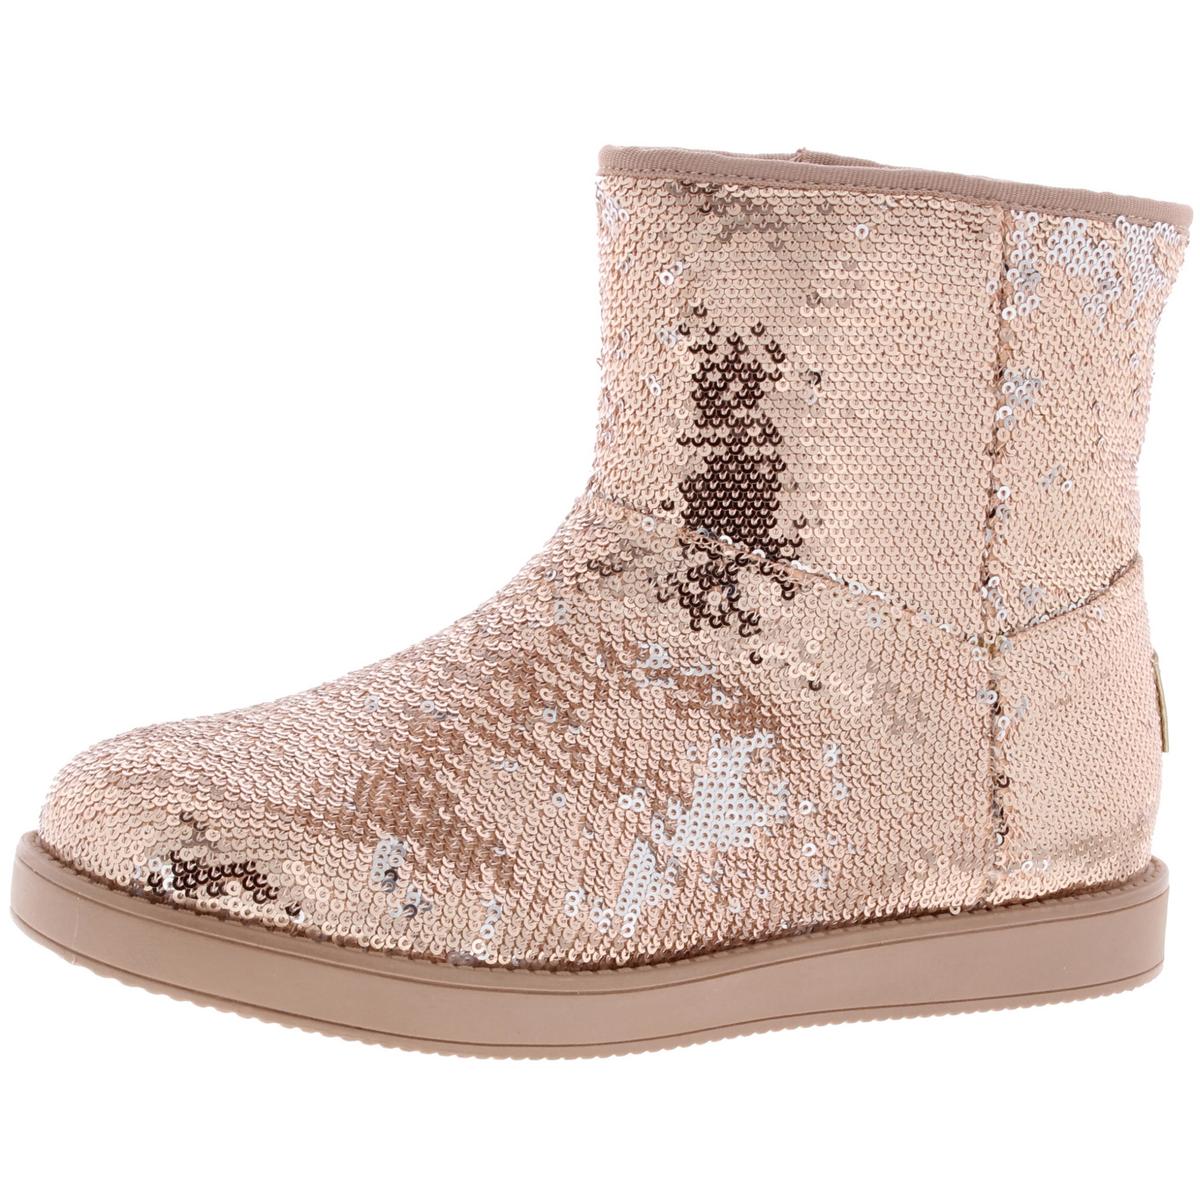 G by Guess Womens Asella Pink Casual Boots Shoes 6 Medium (B,M) BHFO ...